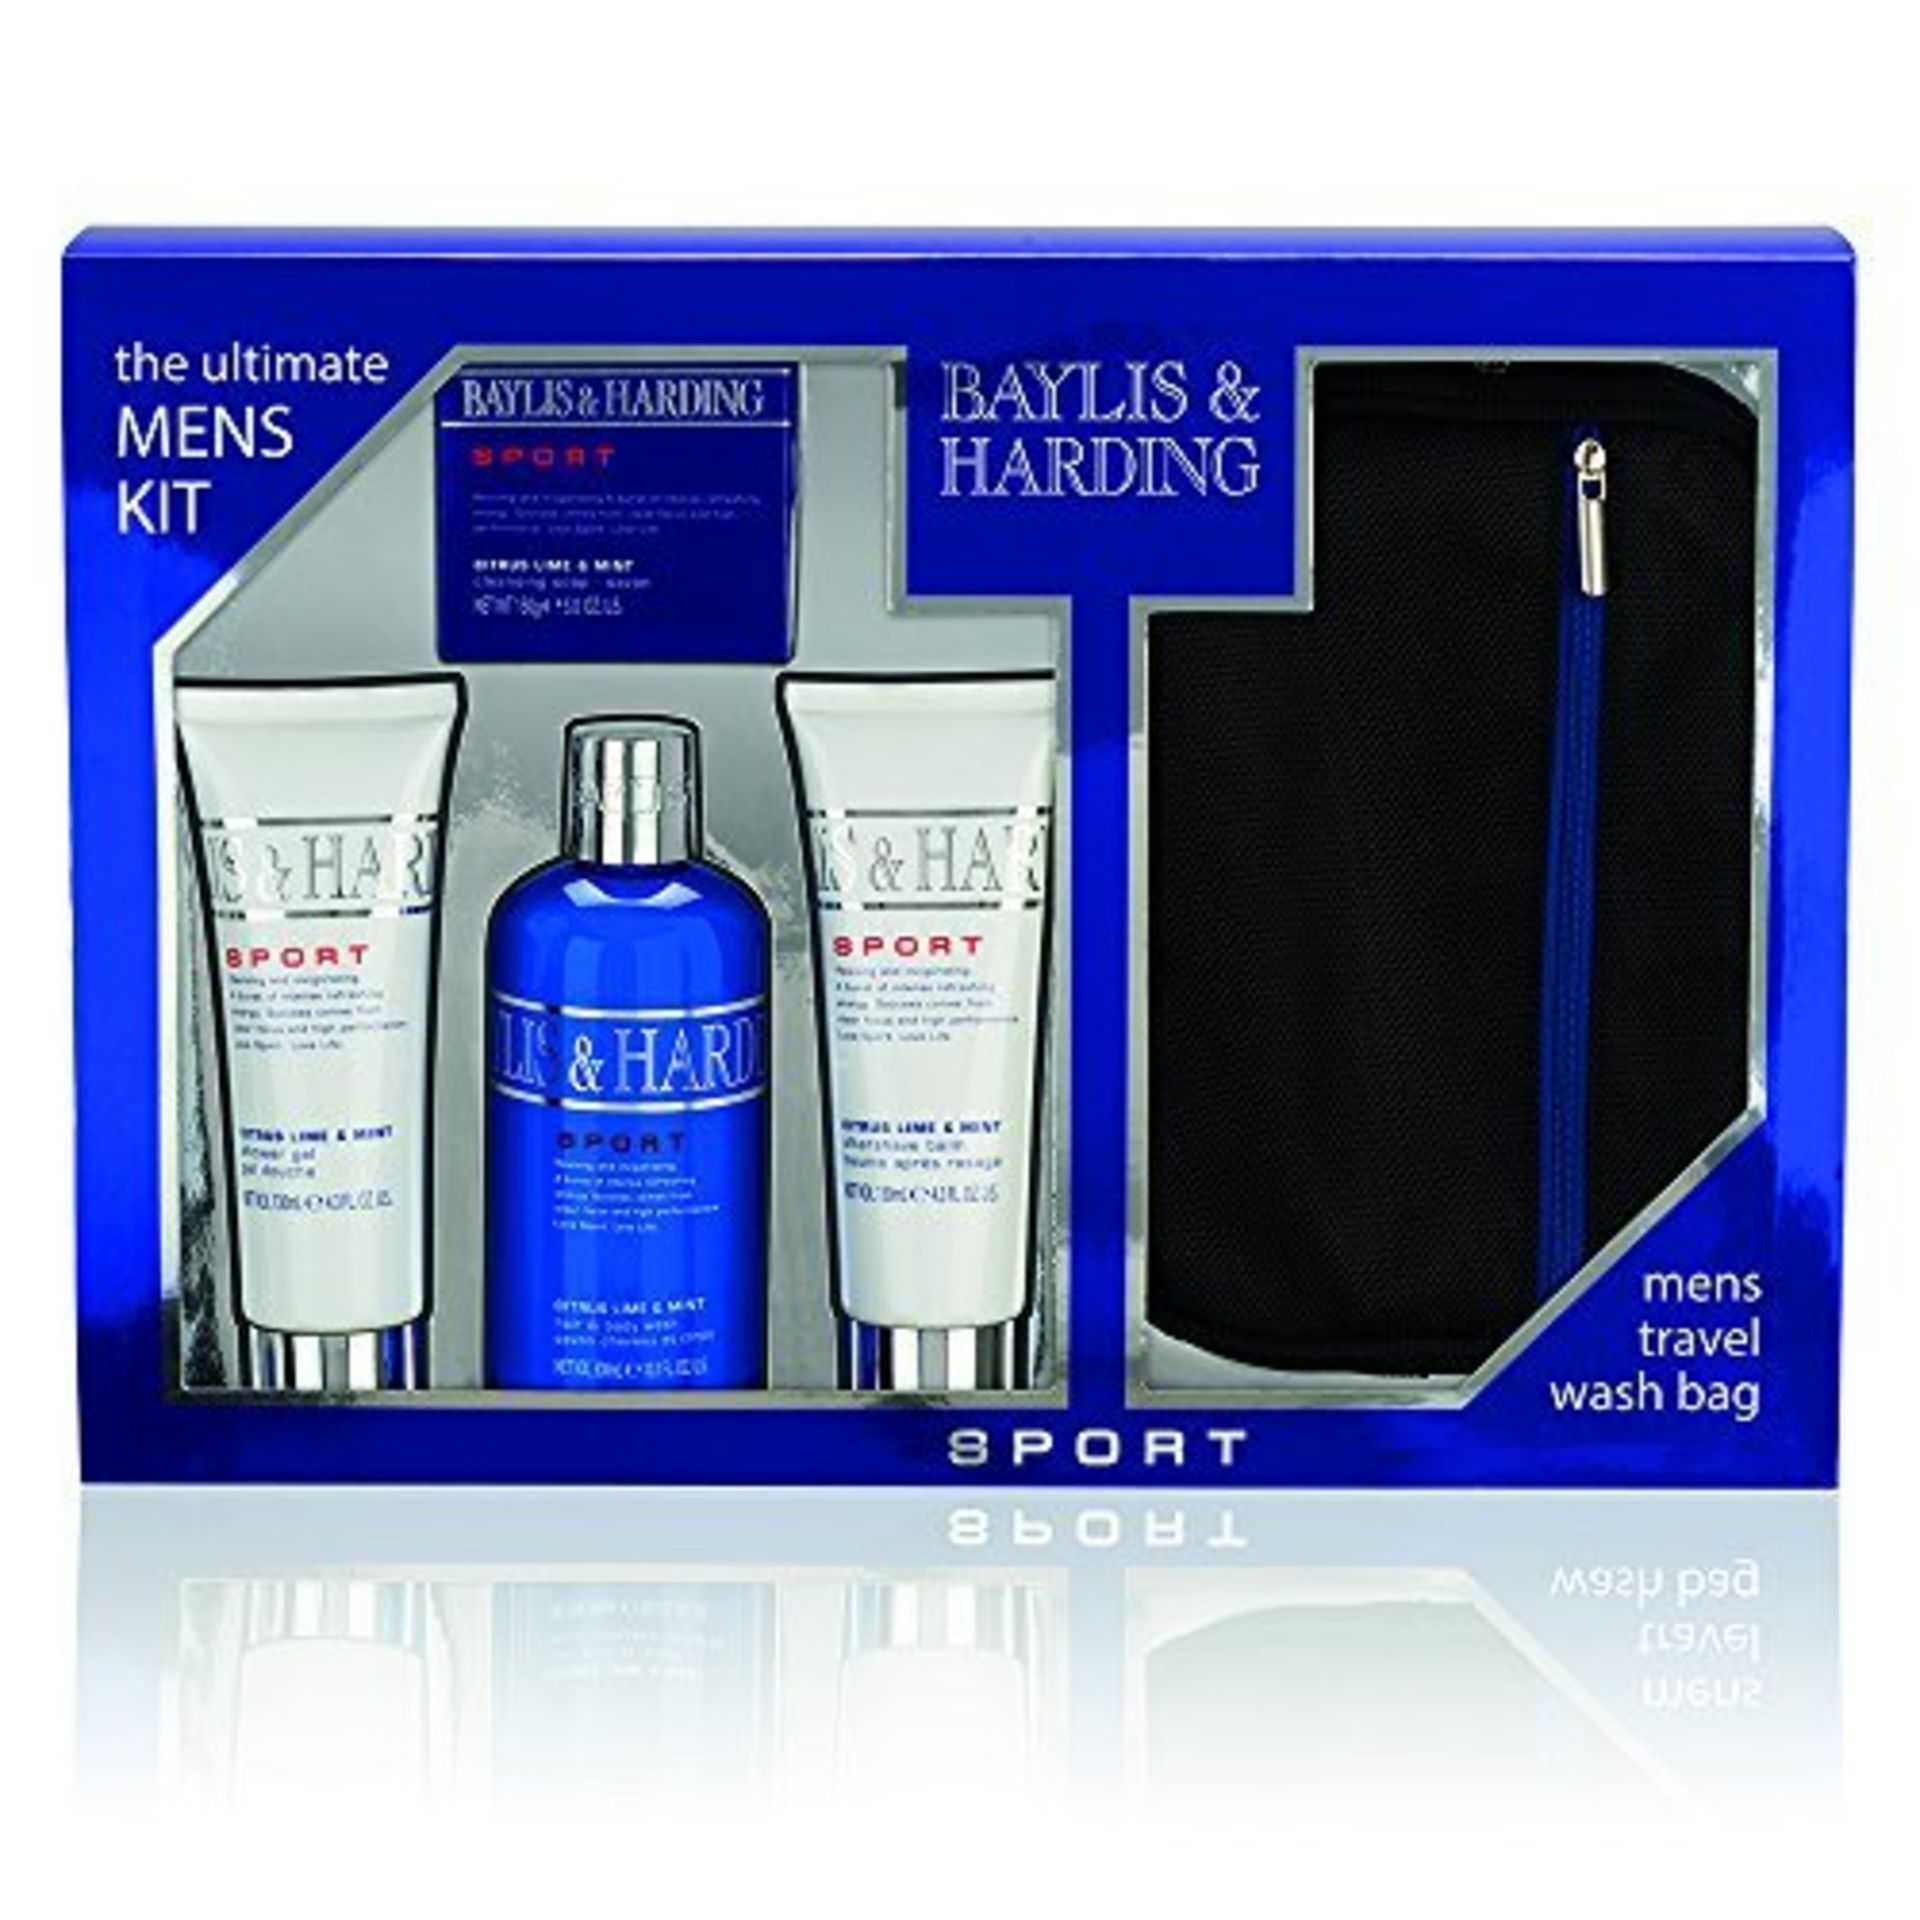 V *TRADE QTY* Brand New Baylis and Harding The Ultimate Men's Kit Including 1 x 300ml Hair and